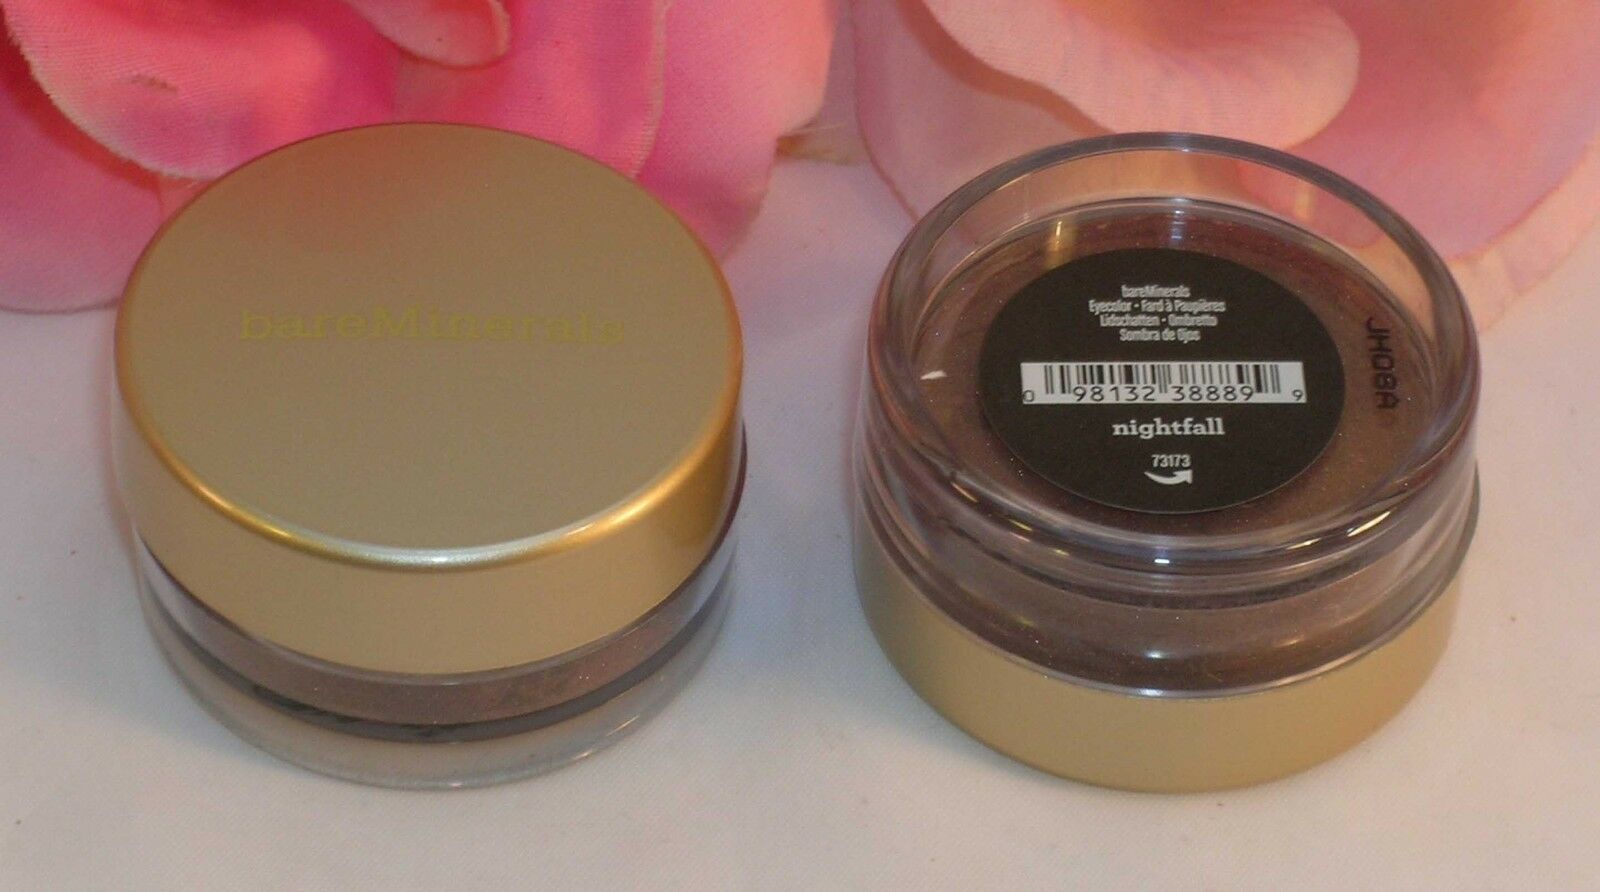 Primary image for New Bare Minerals Eye Color Nightfall Loose Powder .02 oz / .57g I.D. Escentuals